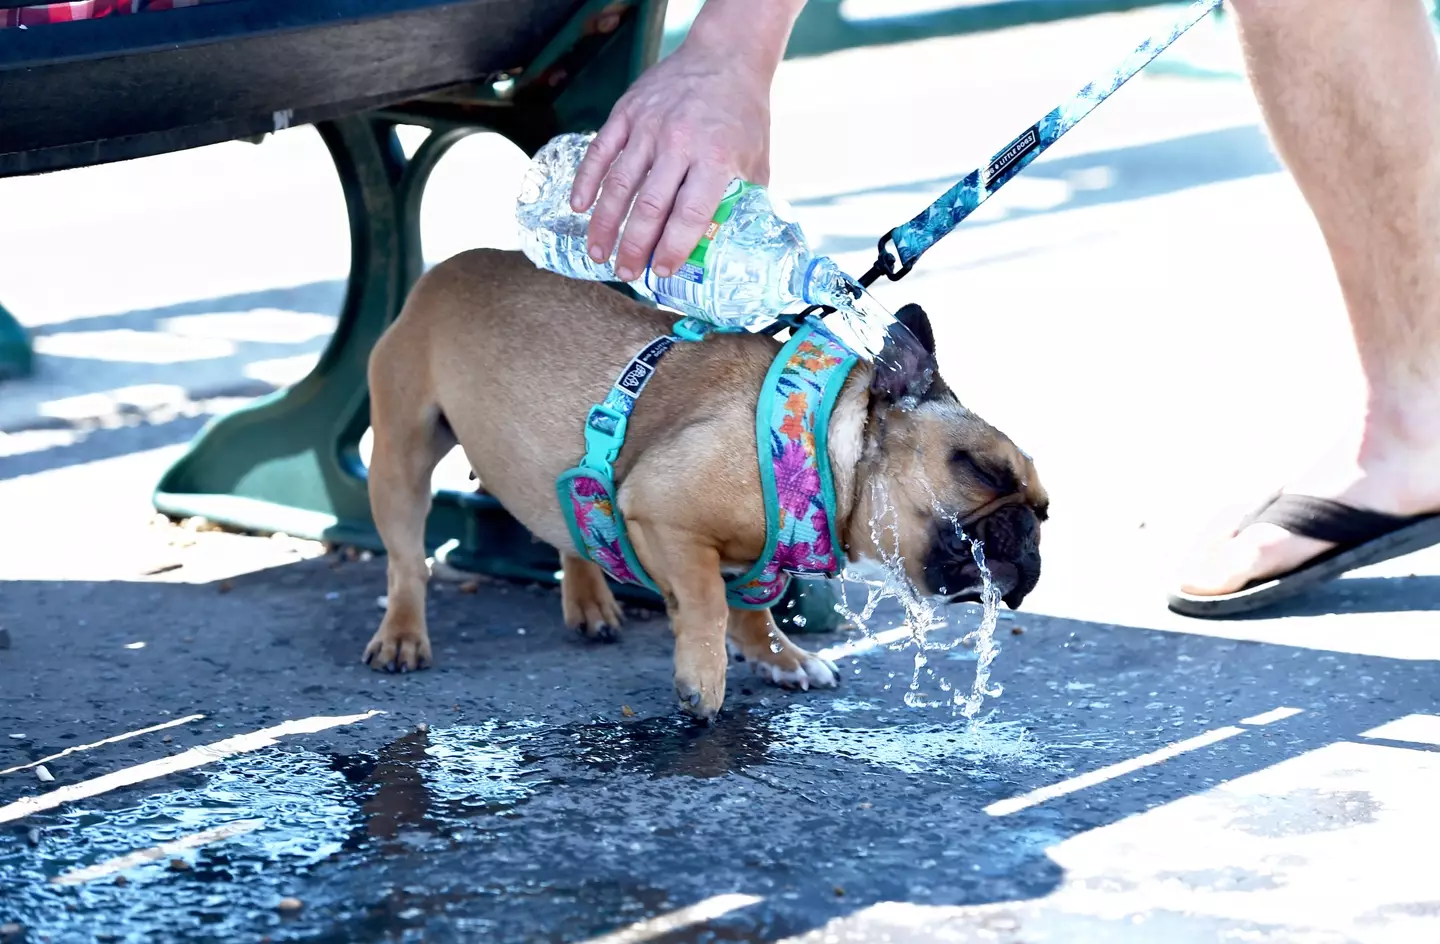 The RSPCA and Blue Cross have issued a warning to pet owners ahead of the heatwave which is set to hit the UK this week.